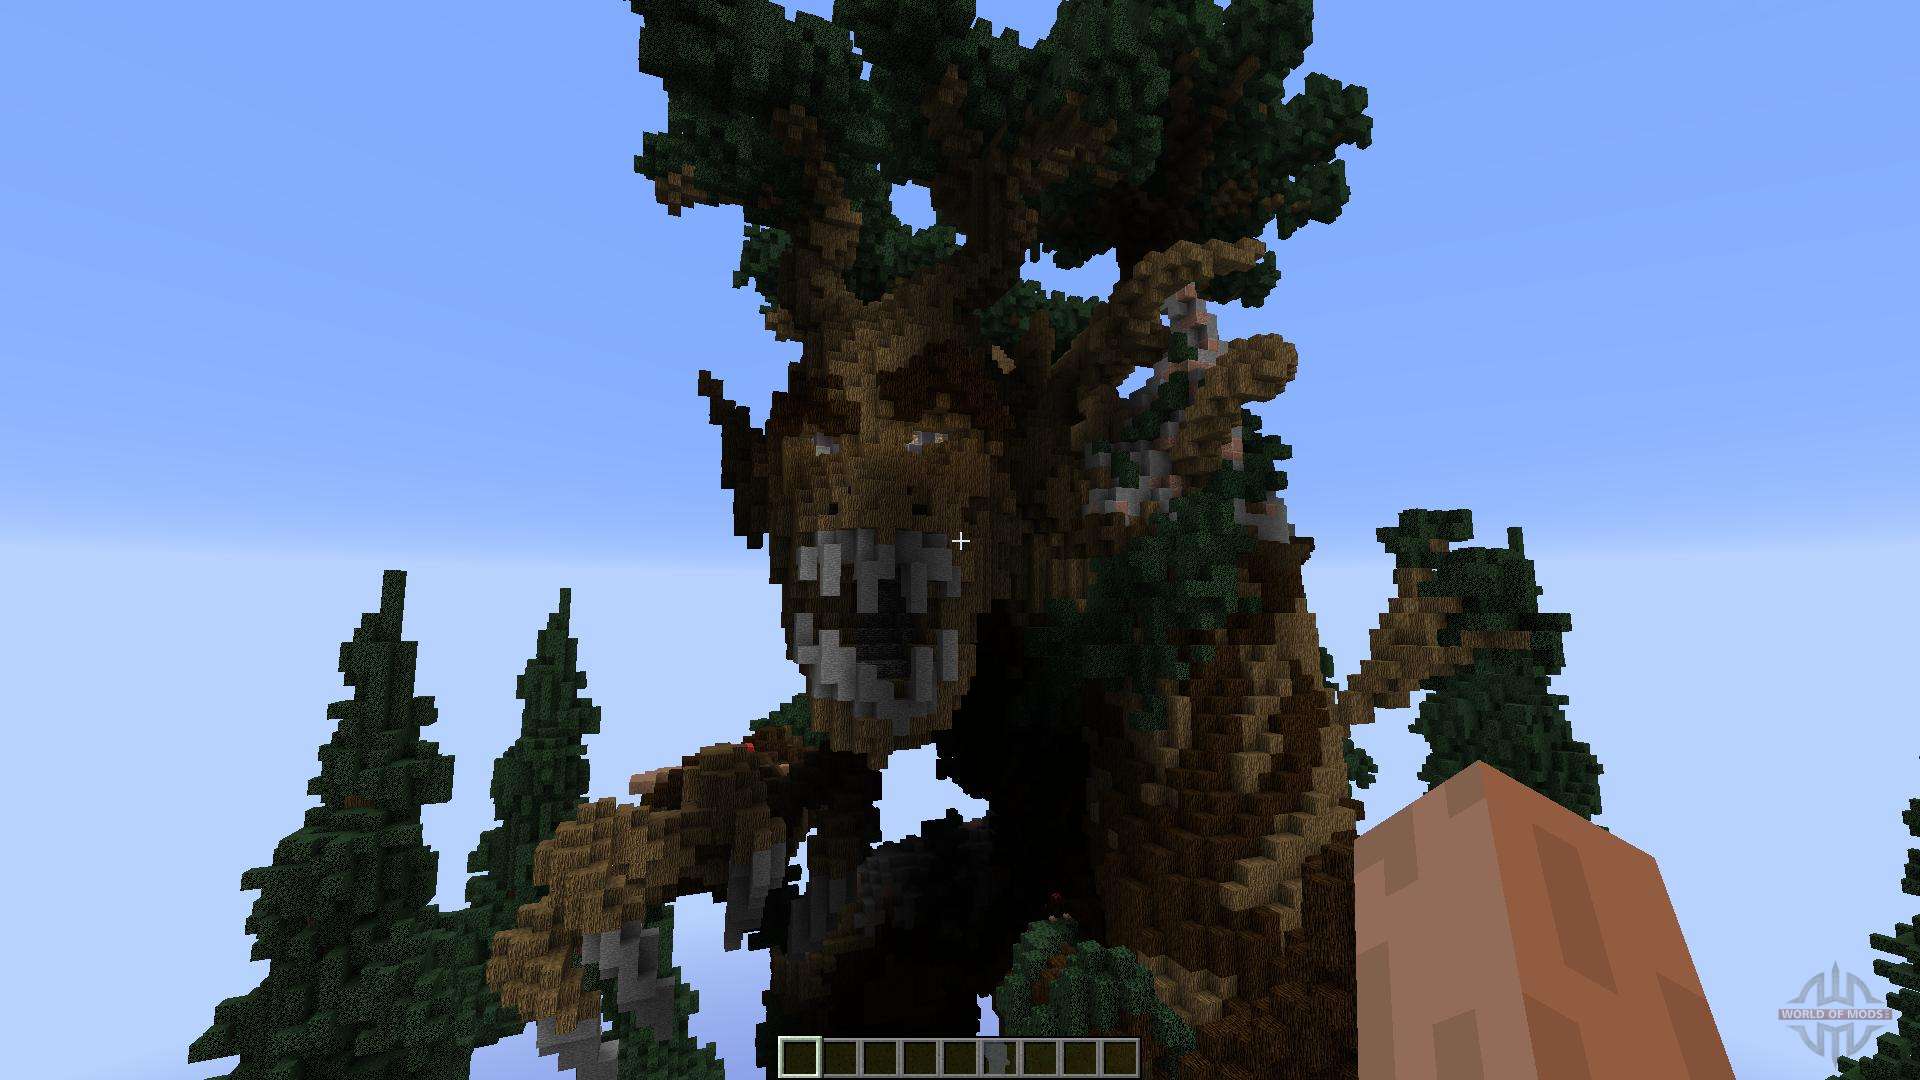 Bob the Ent for Minecraft